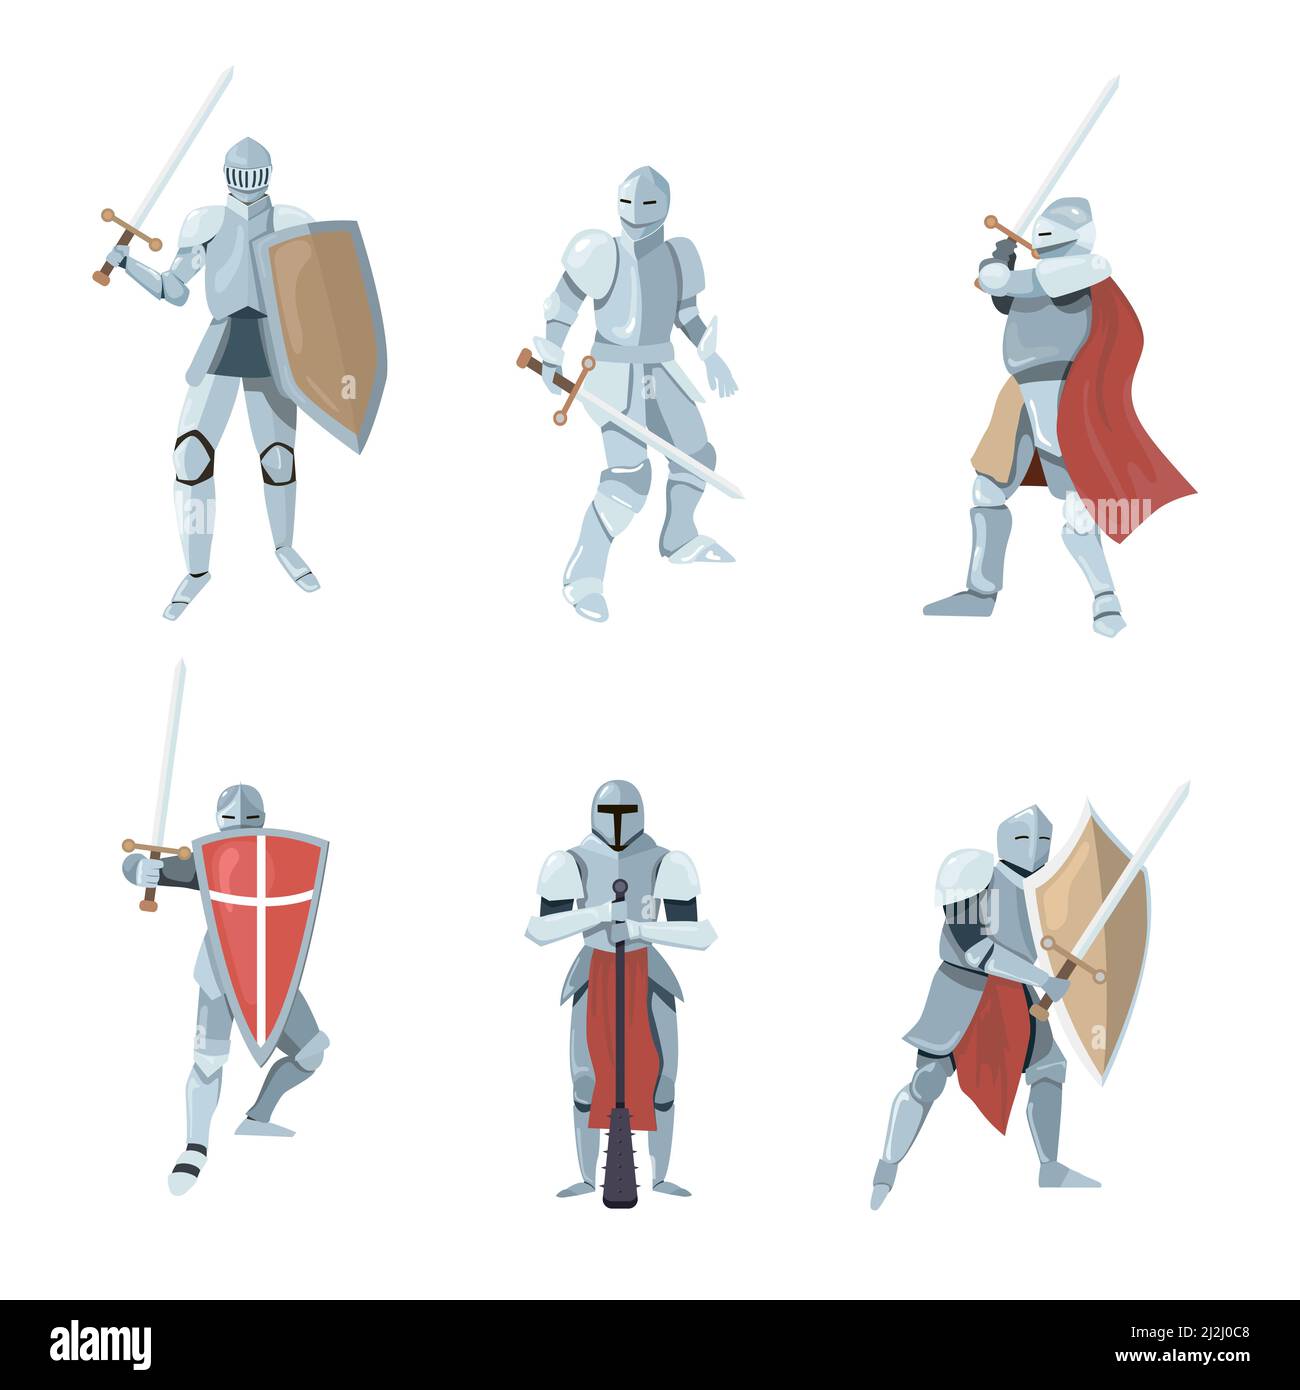 Chivalry cartoon vector illustration set. Knights or medieval fighters, soldiers in different poses during battle or fight. Man characters in armor wi Stock Vector